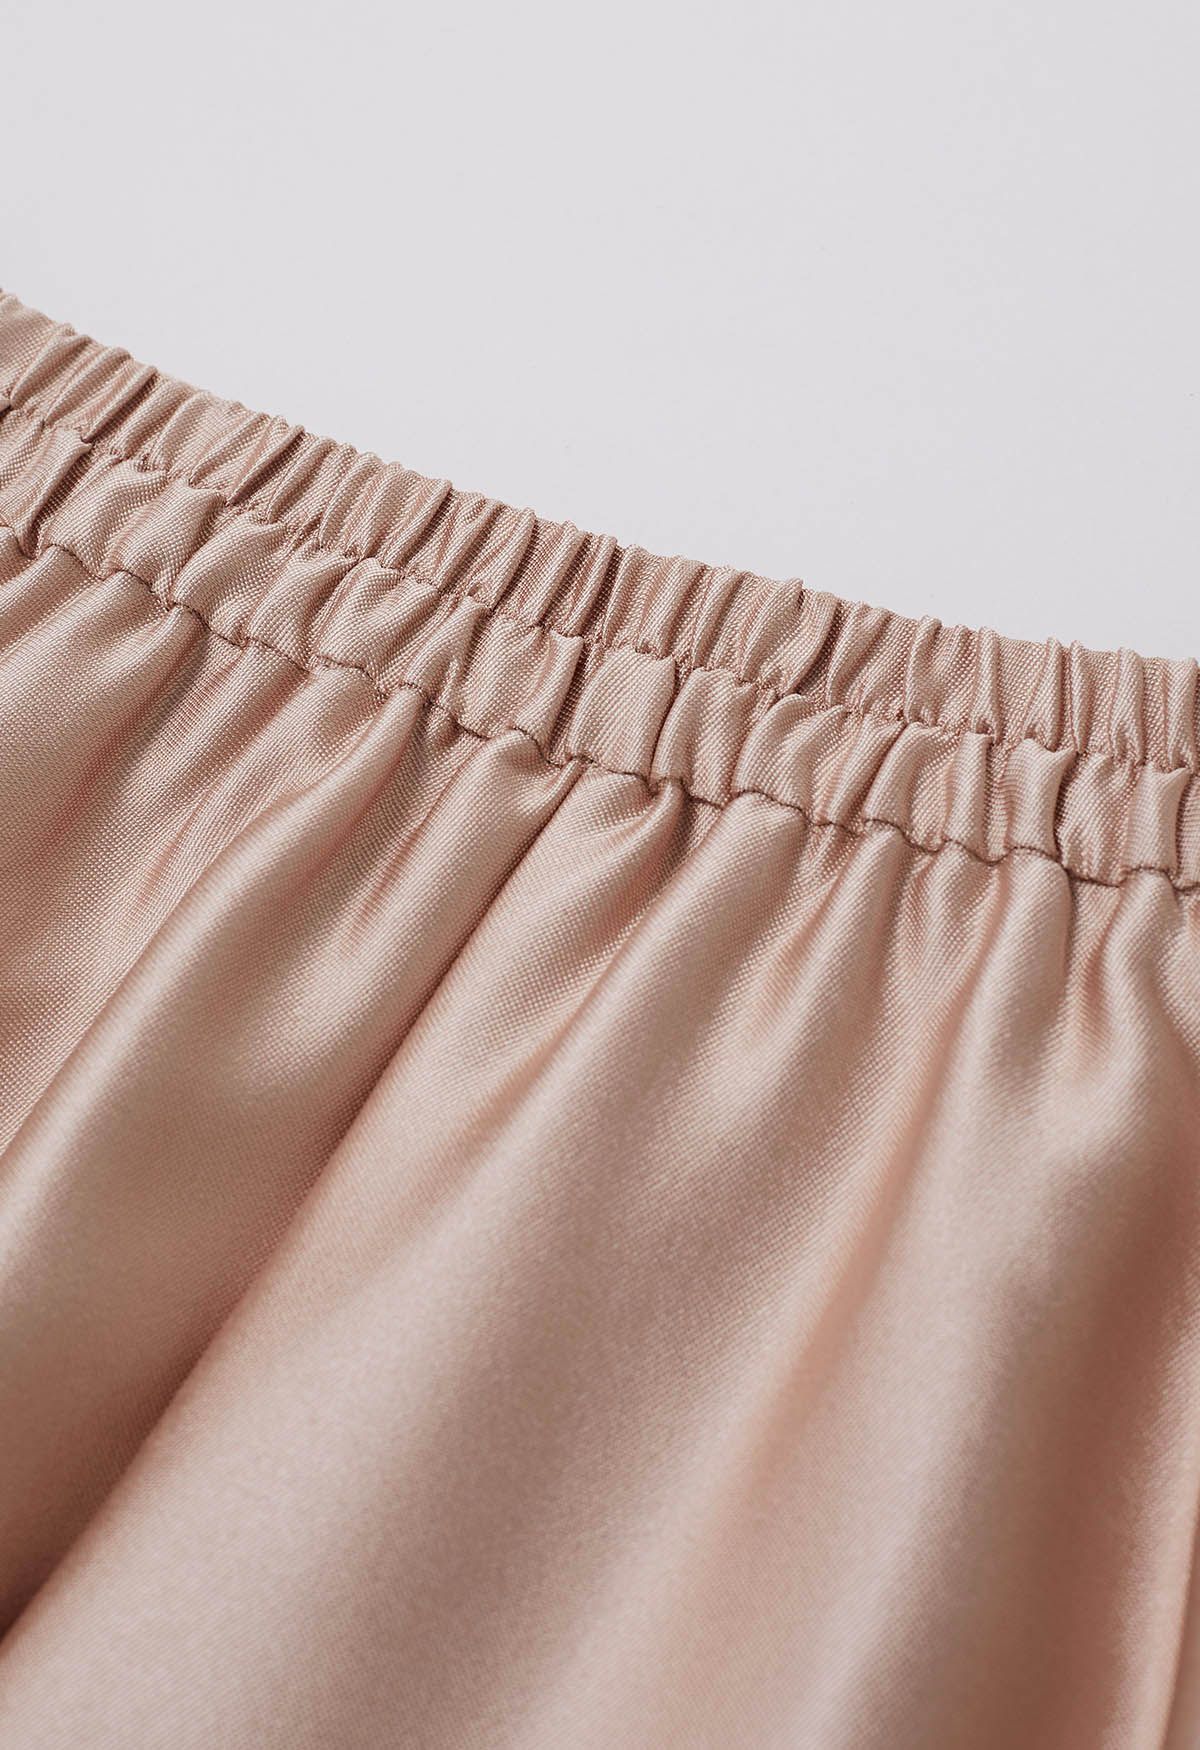 Sleek Side Pockets Pleated A-Line Midi Skirt in Coral